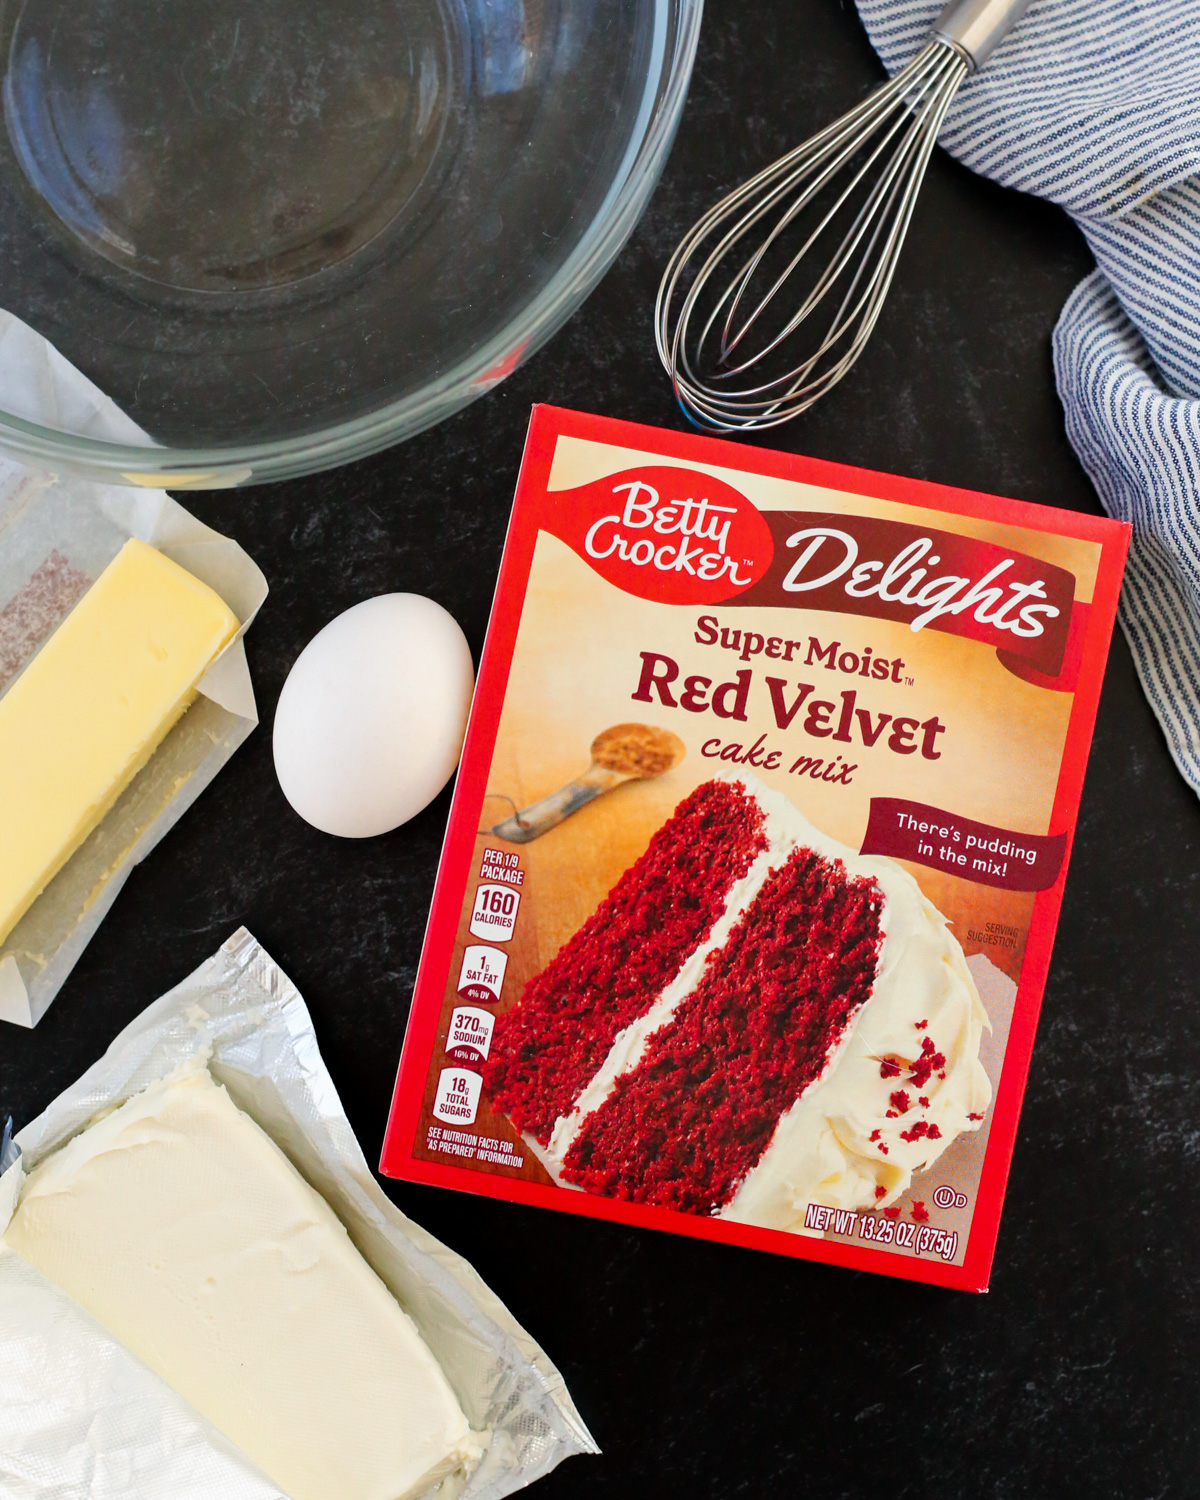 An overhead view of a box of Betty Crocker Super Moist Red Velvet Cake Mix is shown on a kitchen countertop next to an egg, a stick of butter, a block of cream cheese, a clear glass mixing bowl, and a stainless steel whisk